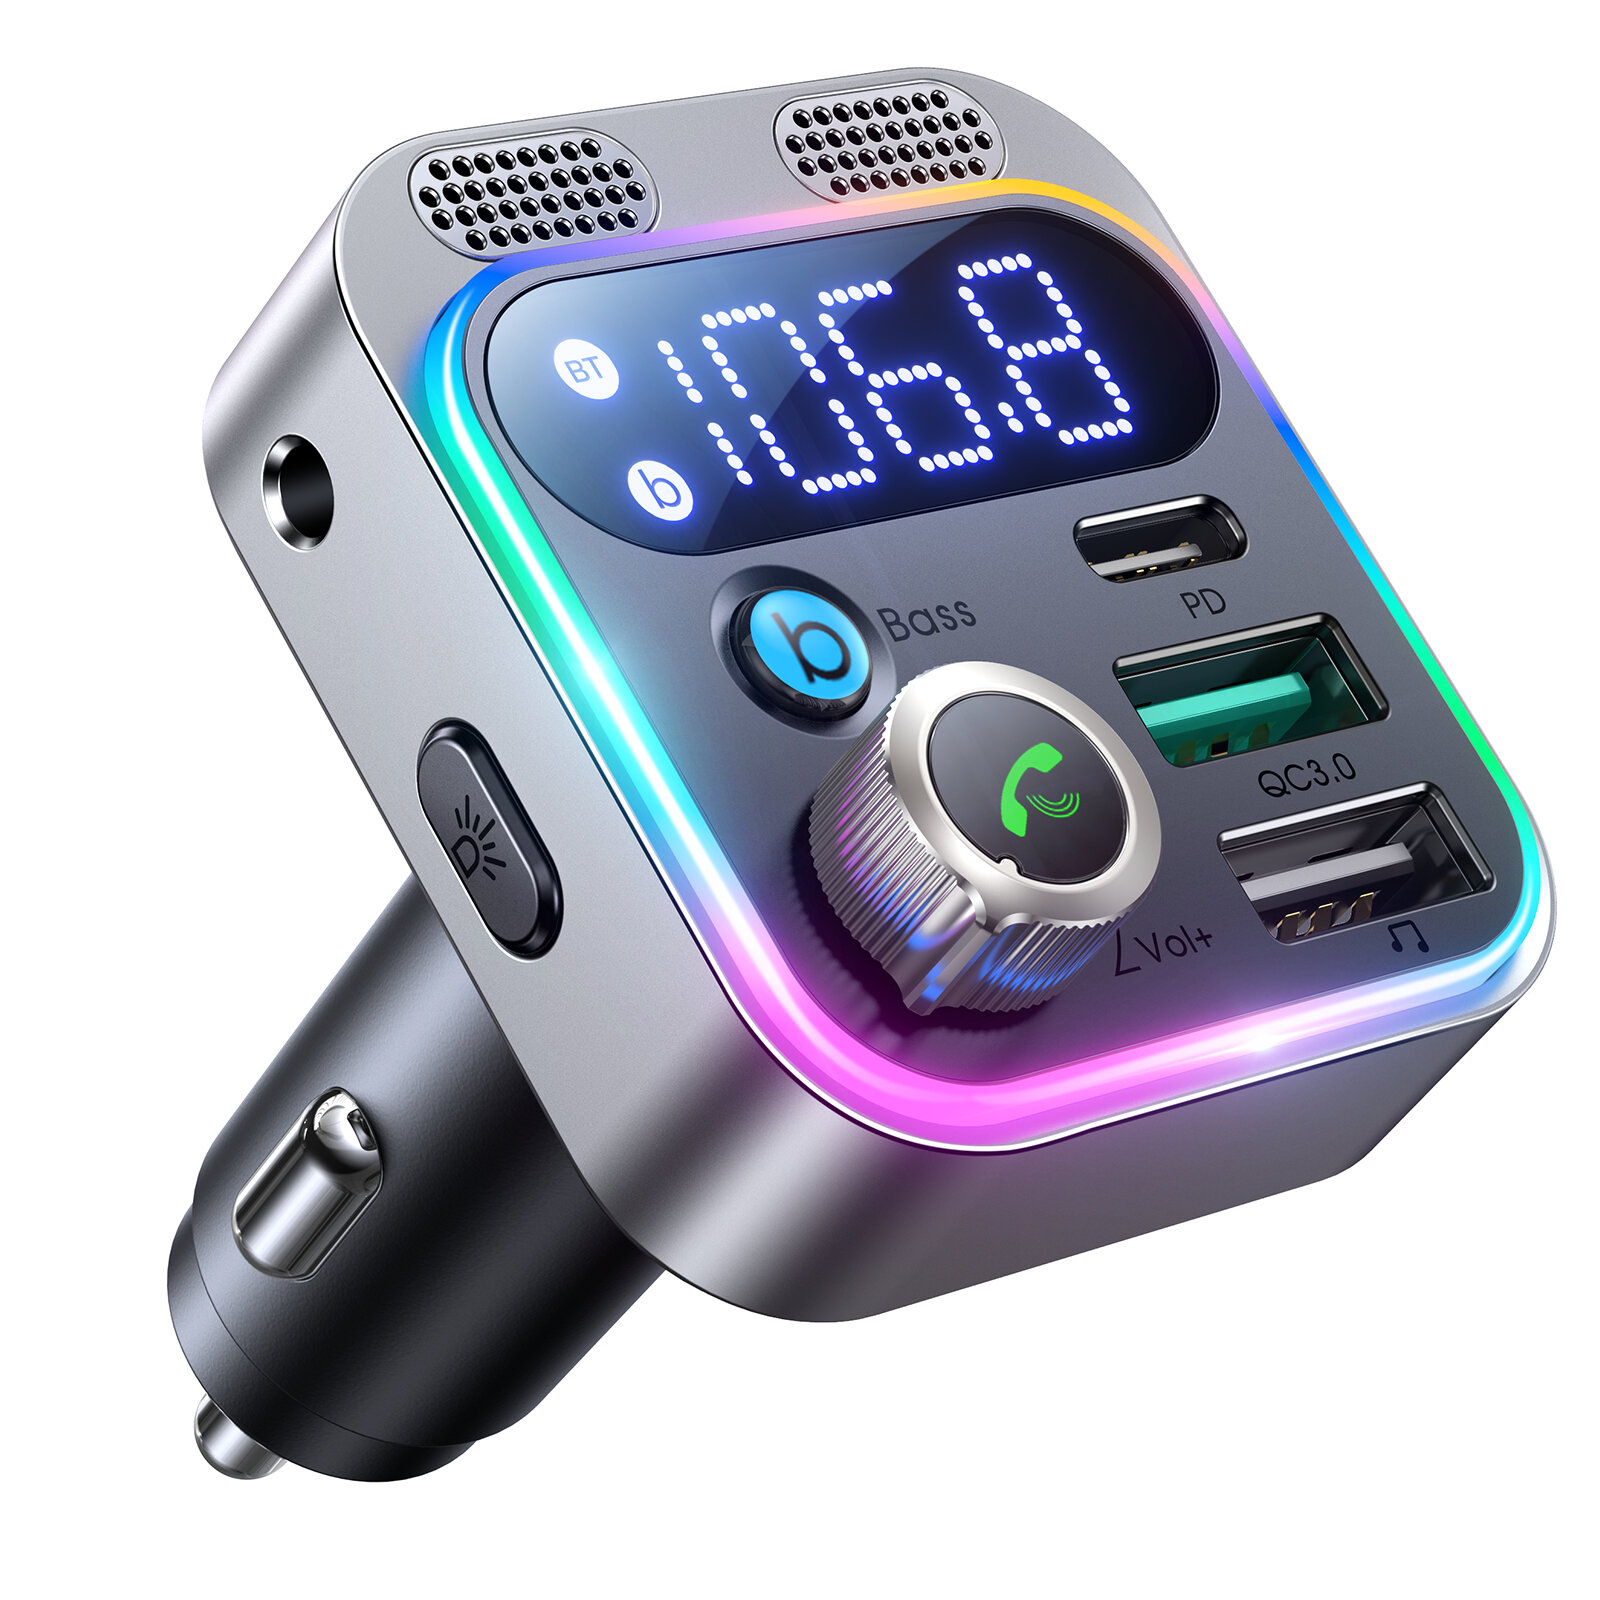 

48W Car bluetooth 5.0 Transmitter with Dual Mic LED Display QC3.0 PD PPS Fast Charger BASS Hi-Fi AUX Wireless Hands-Free